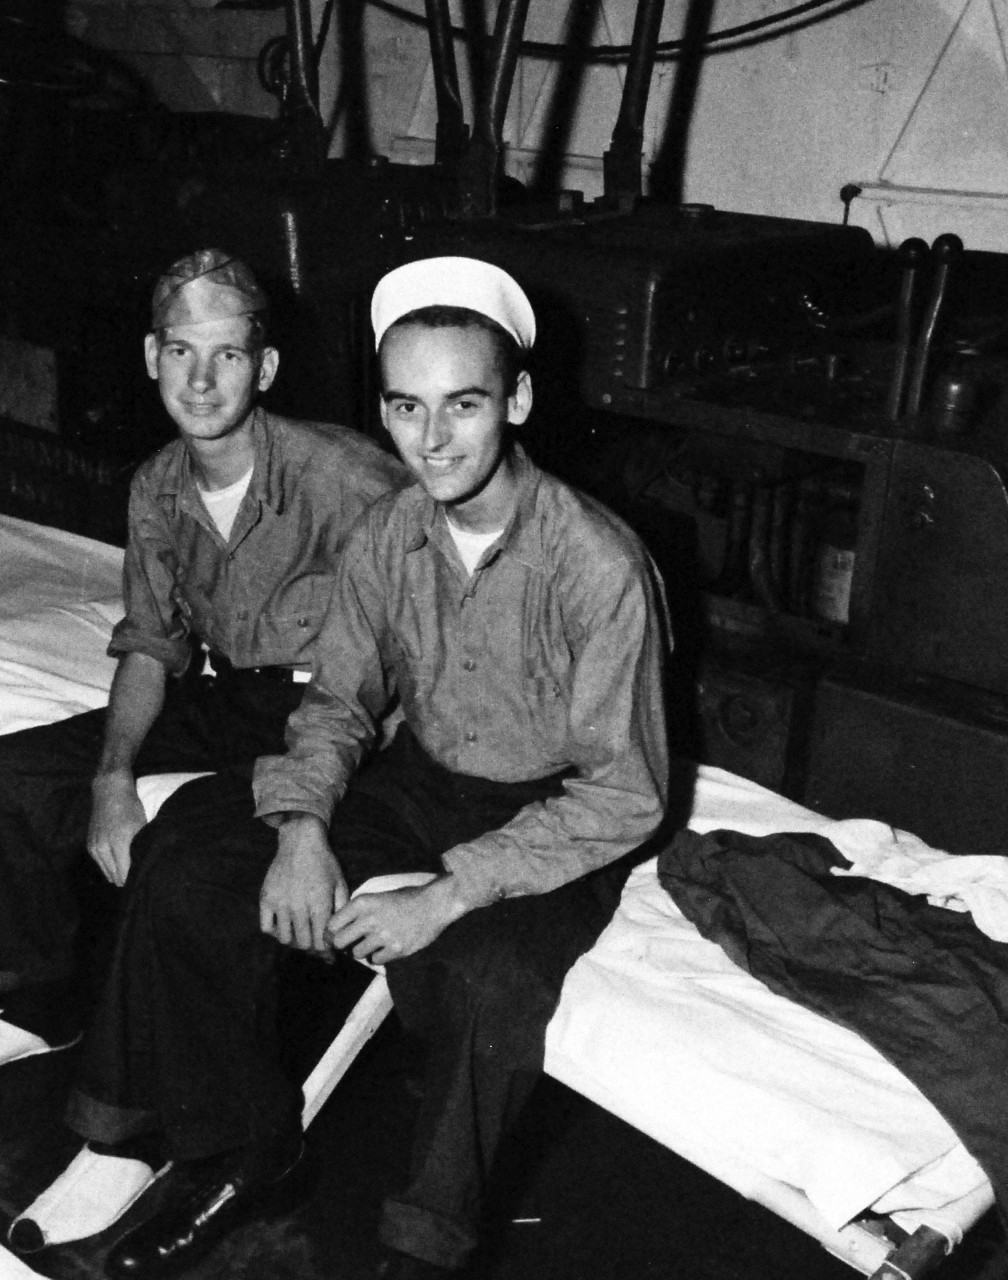 80-G-344558:  Allied Prisoners of War, 1945.    Liberated prisoners R.E. Sandlin and S.J. Rebick.  Photograph released September 25, 1945.  Official U.S. Navy photograph, now in the collections of the National Archives.   (2015/11/24).